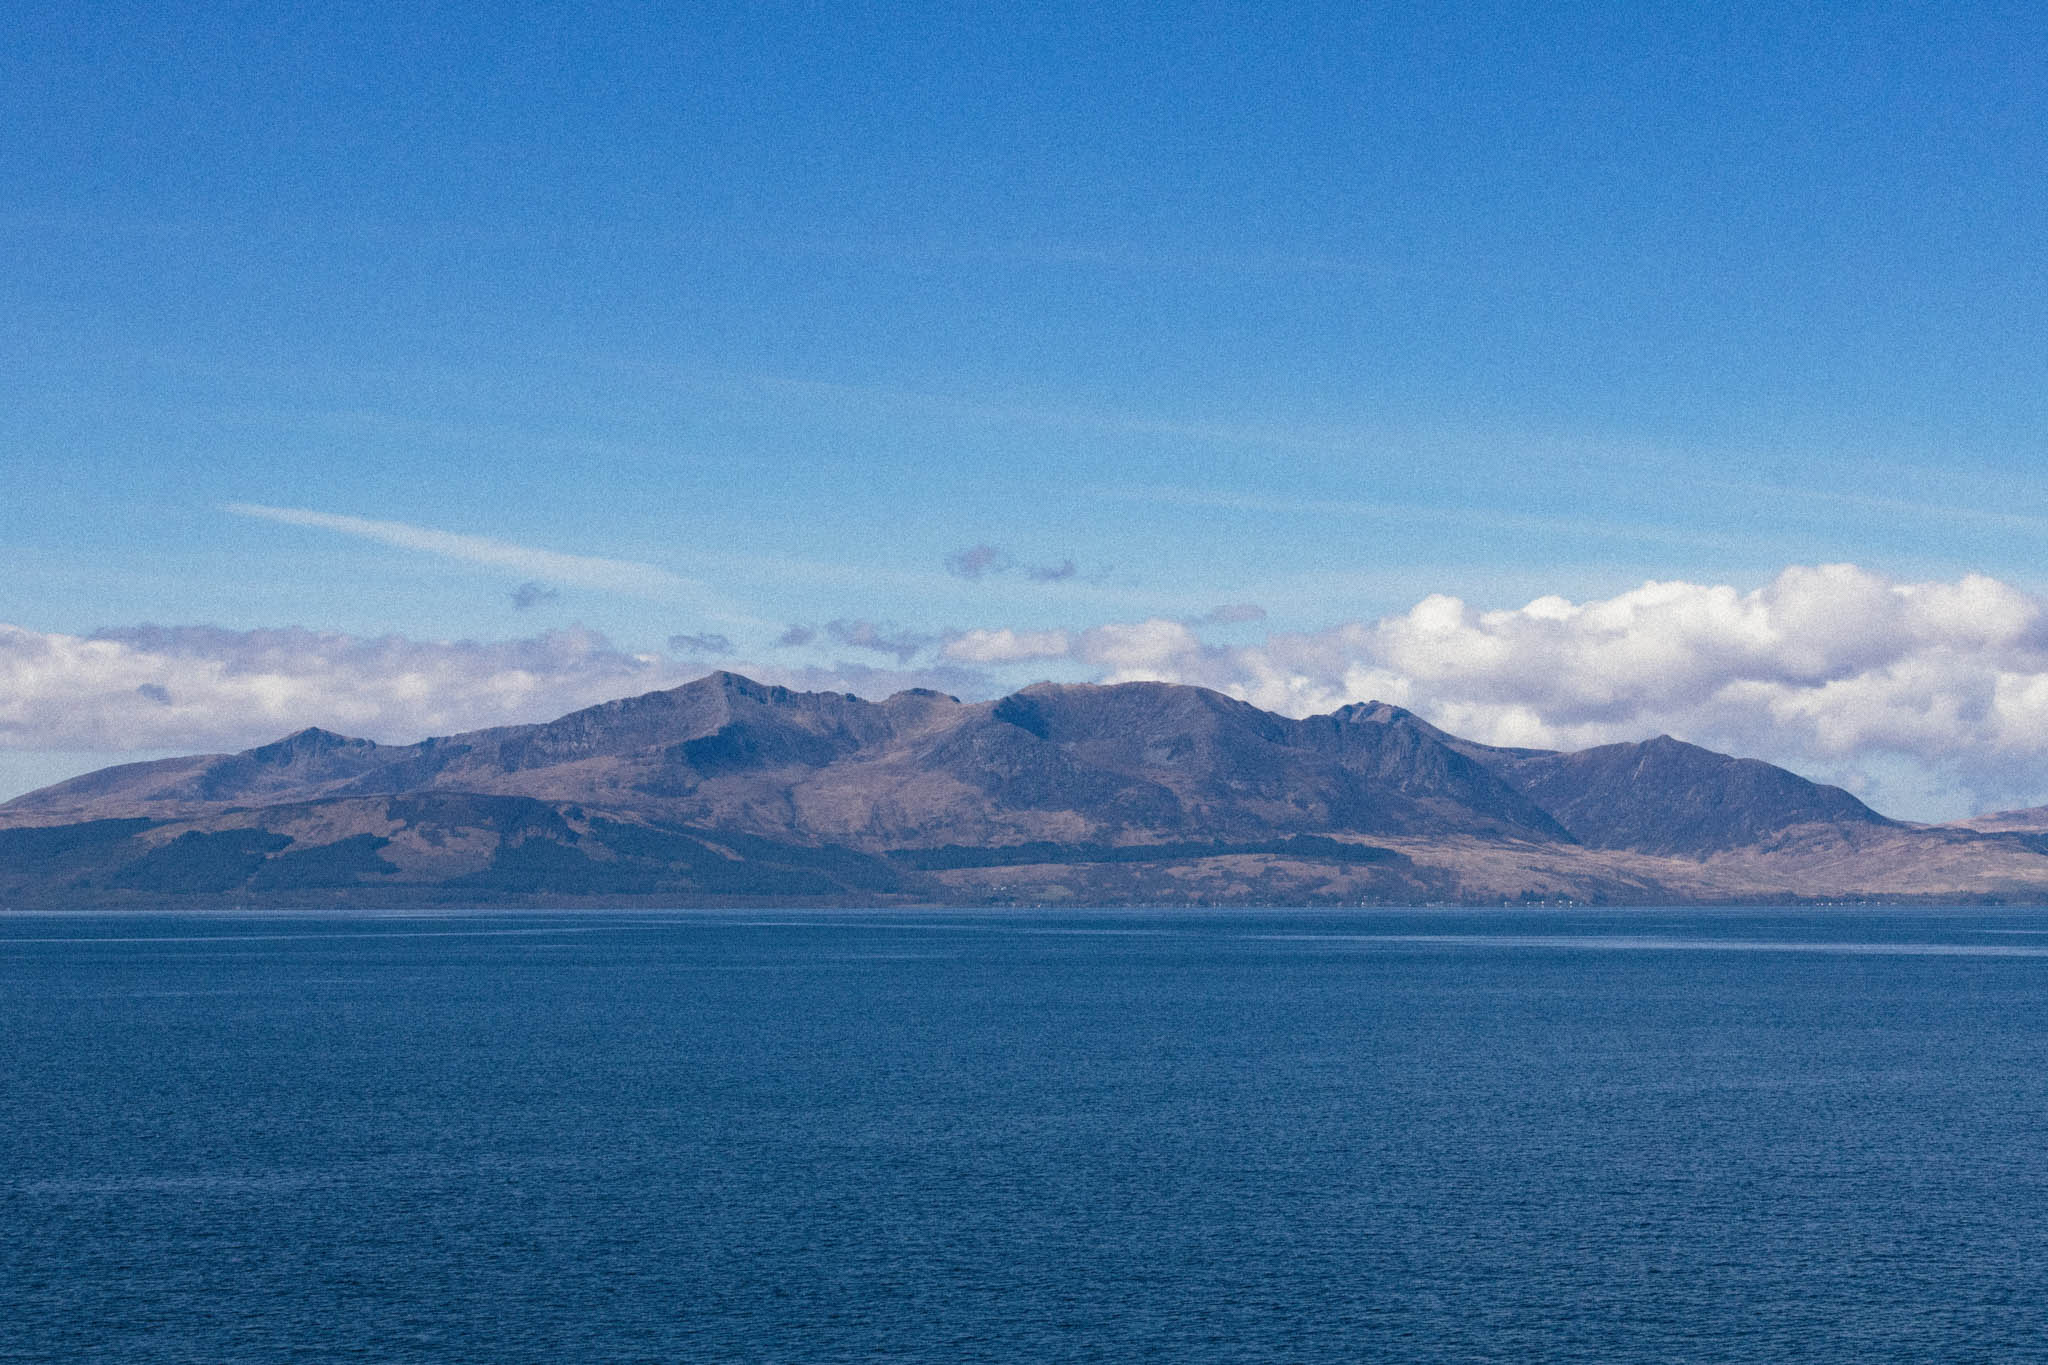 Isle of Arran Travel Guide: Things to do on Arran